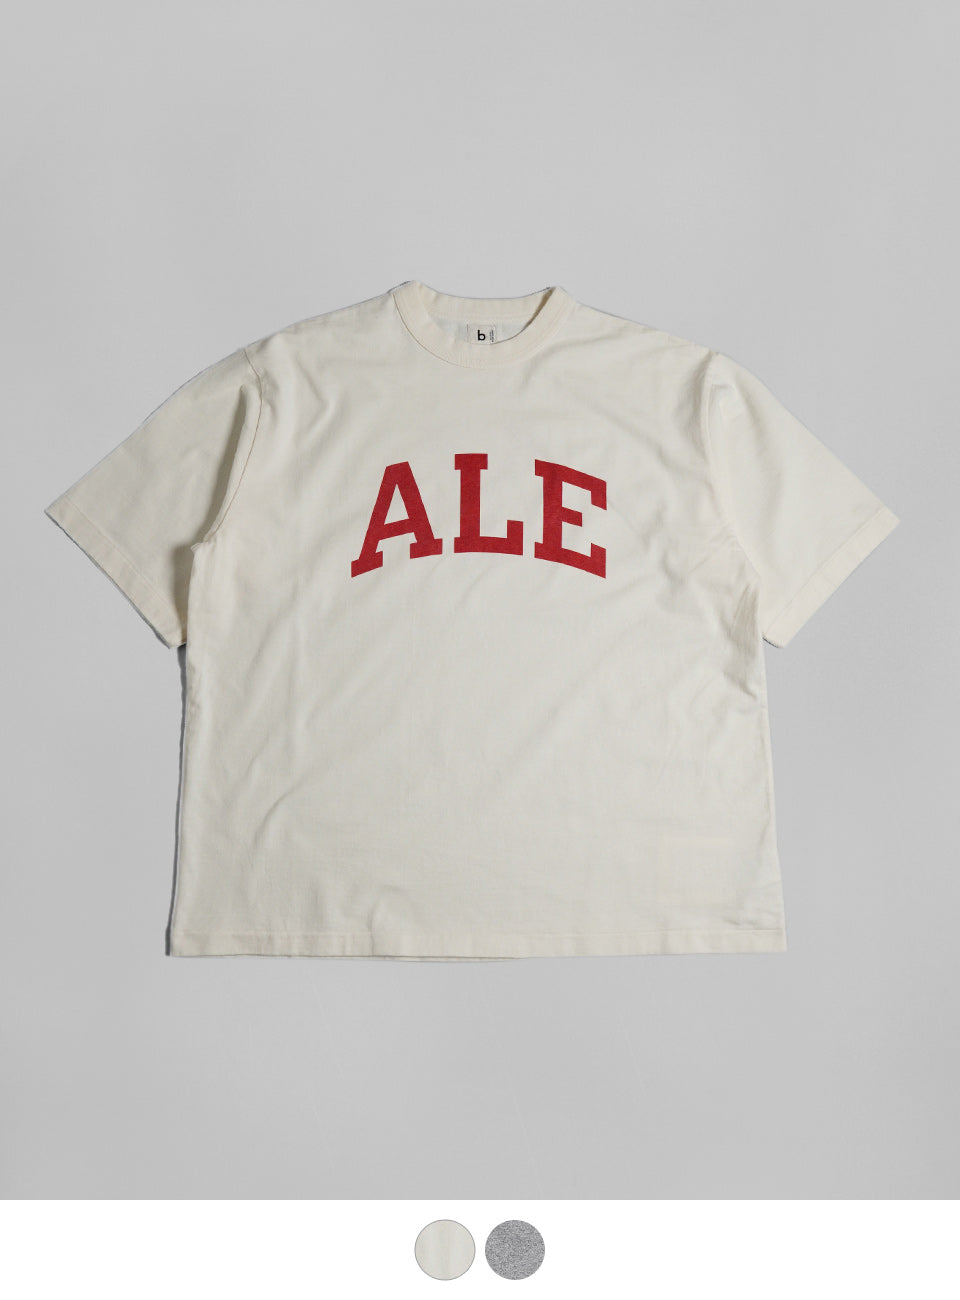 blurhms ROOTSTOCK ブラームス ルーツストック プリント Tシャツ ワイド ALE-Y 88/12 Print Tee WIDE【送料無料】正規取扱店